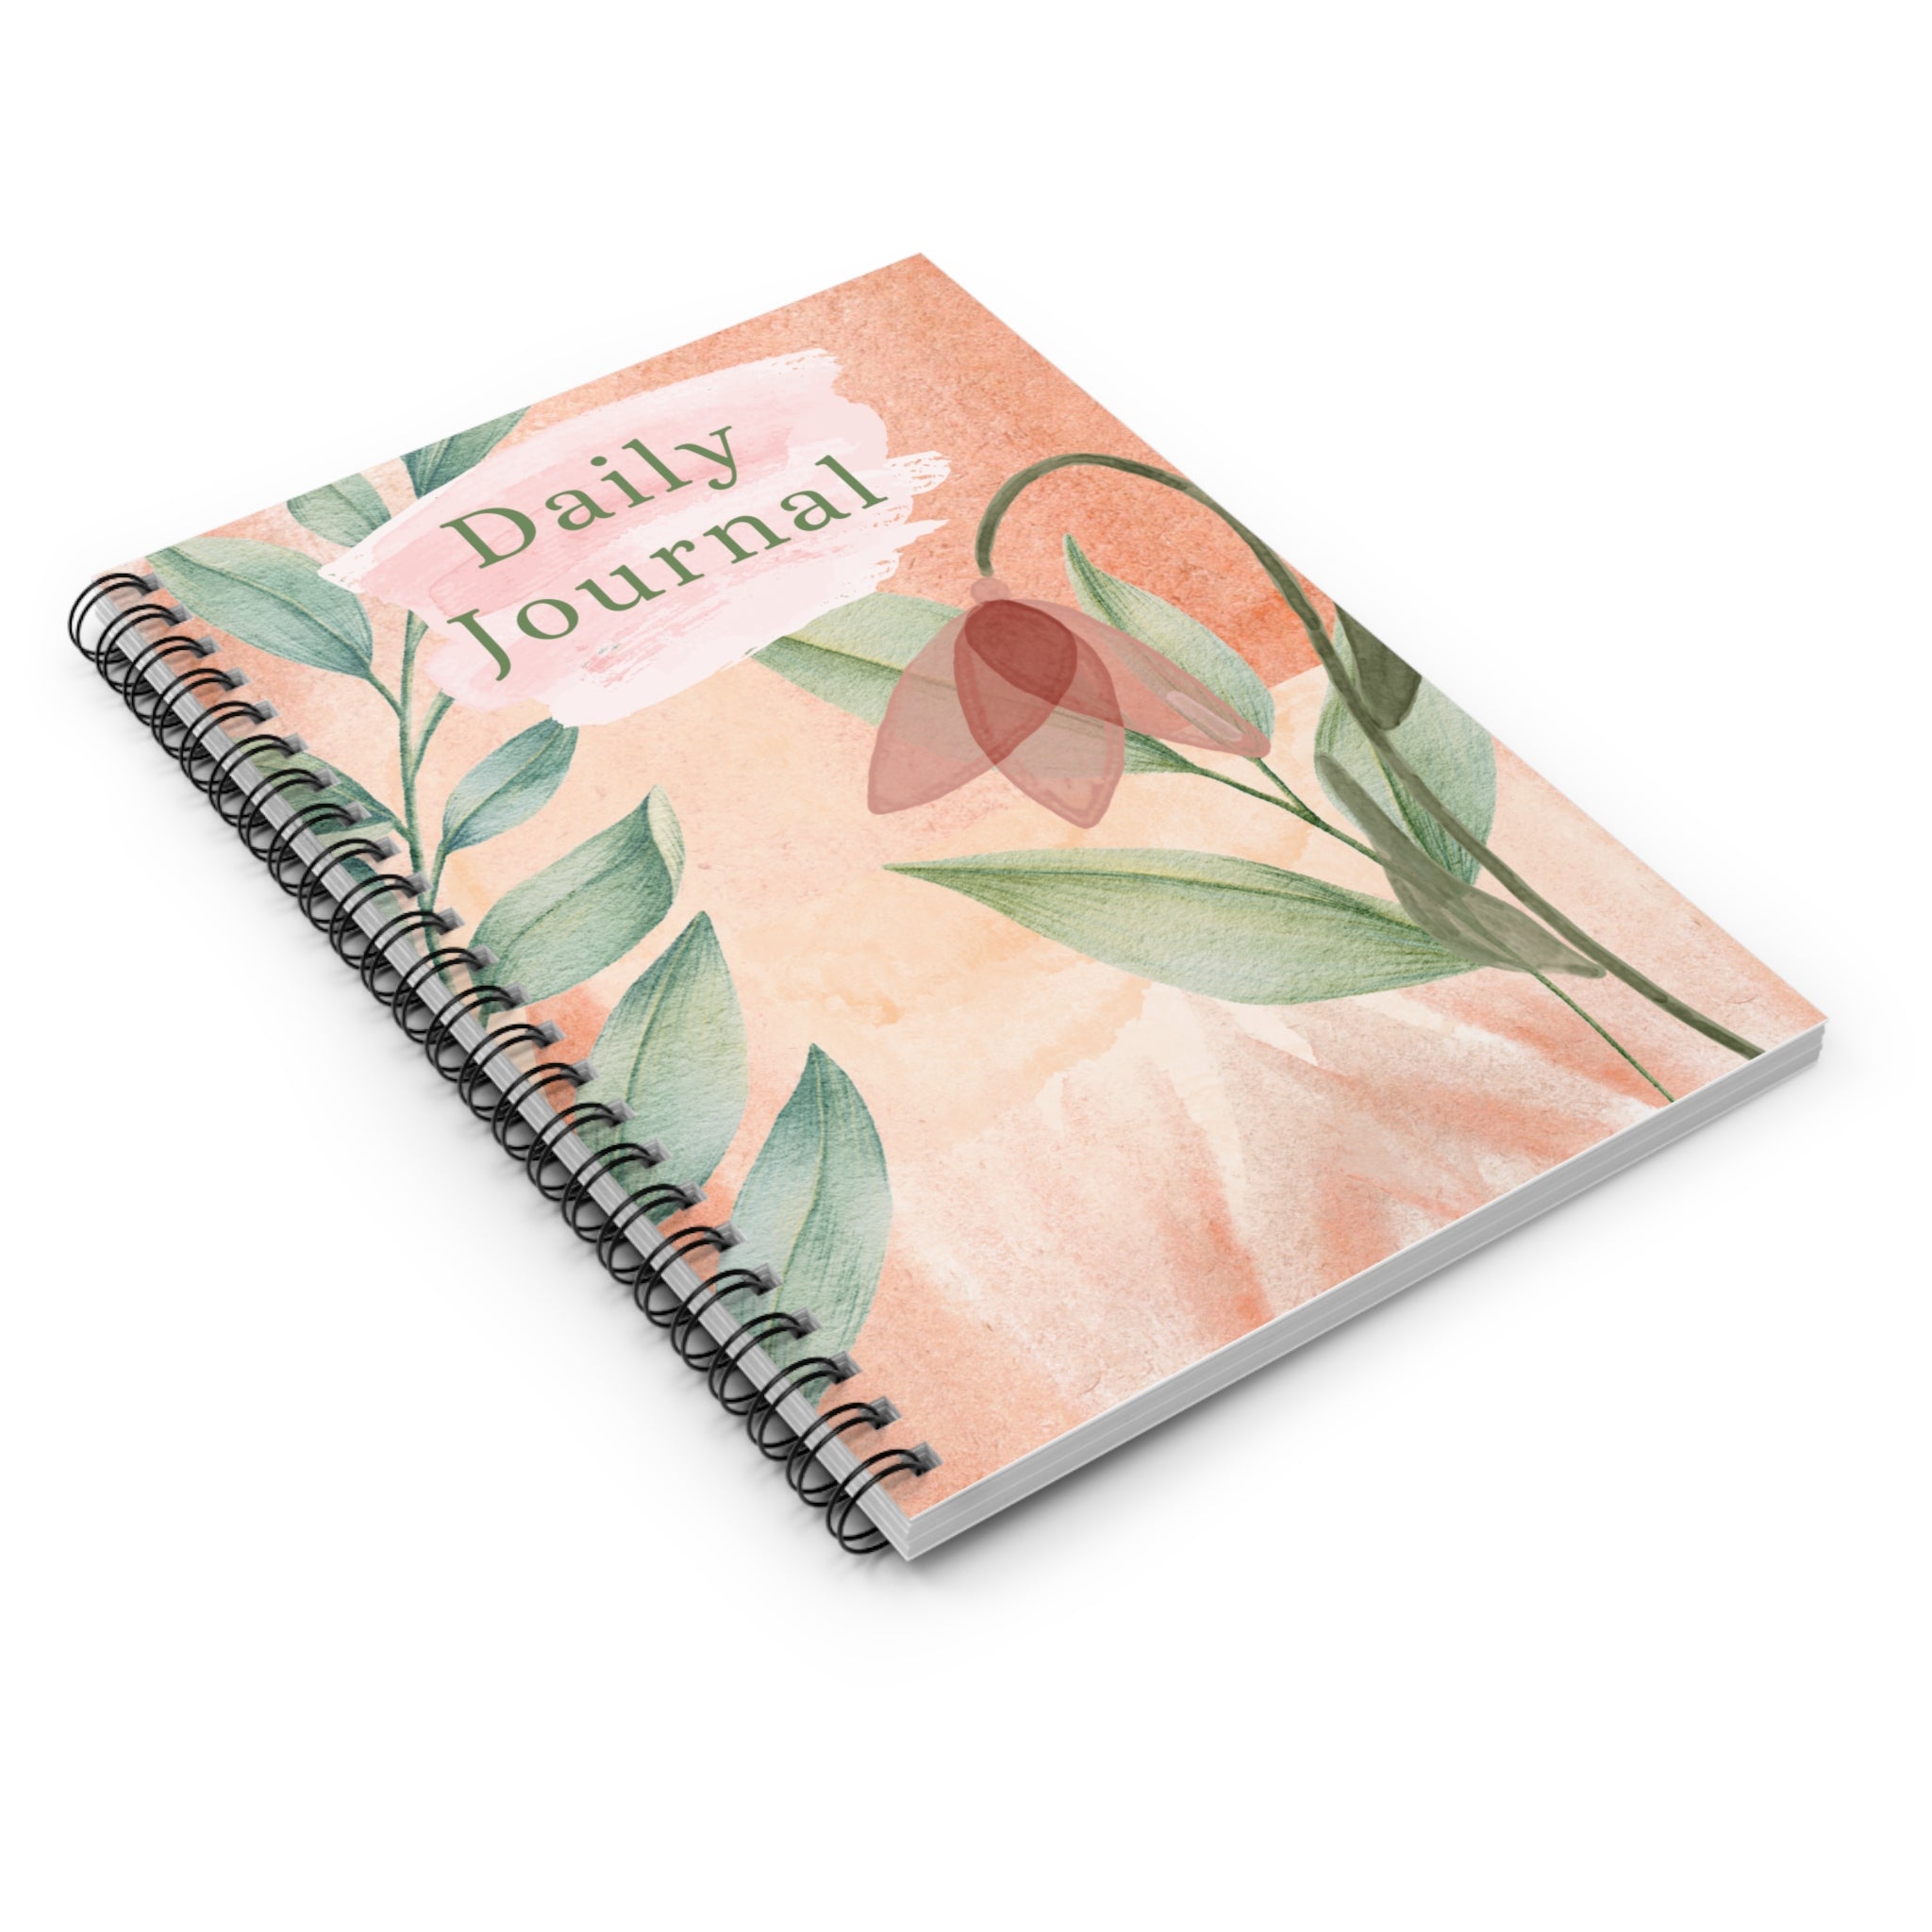 Daily Journal Water Color Design - Ruled Line Paper products Krazy Heart Designs Boutique   